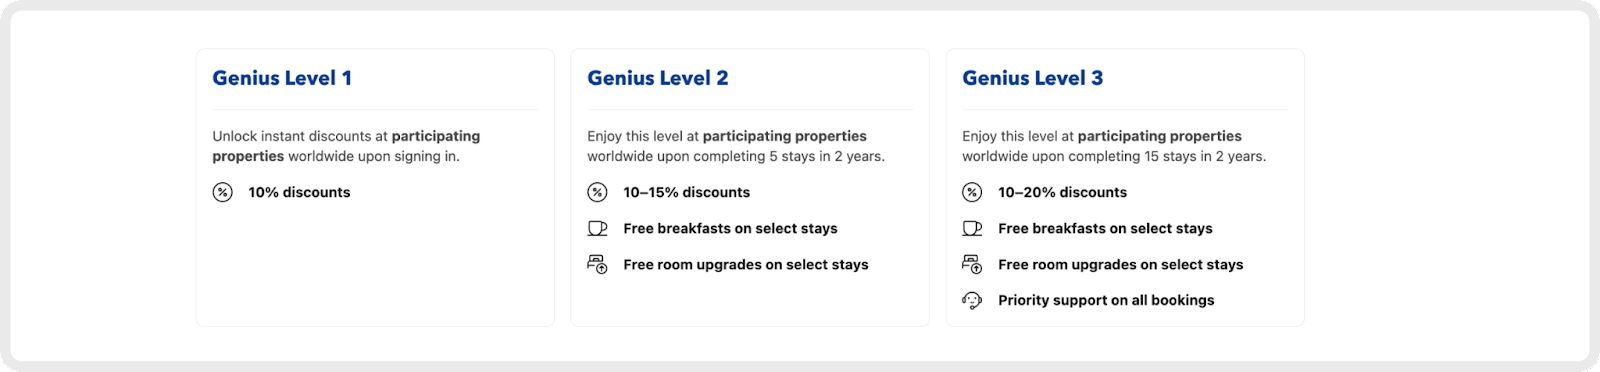 Screenshot from booking.com - Gamification